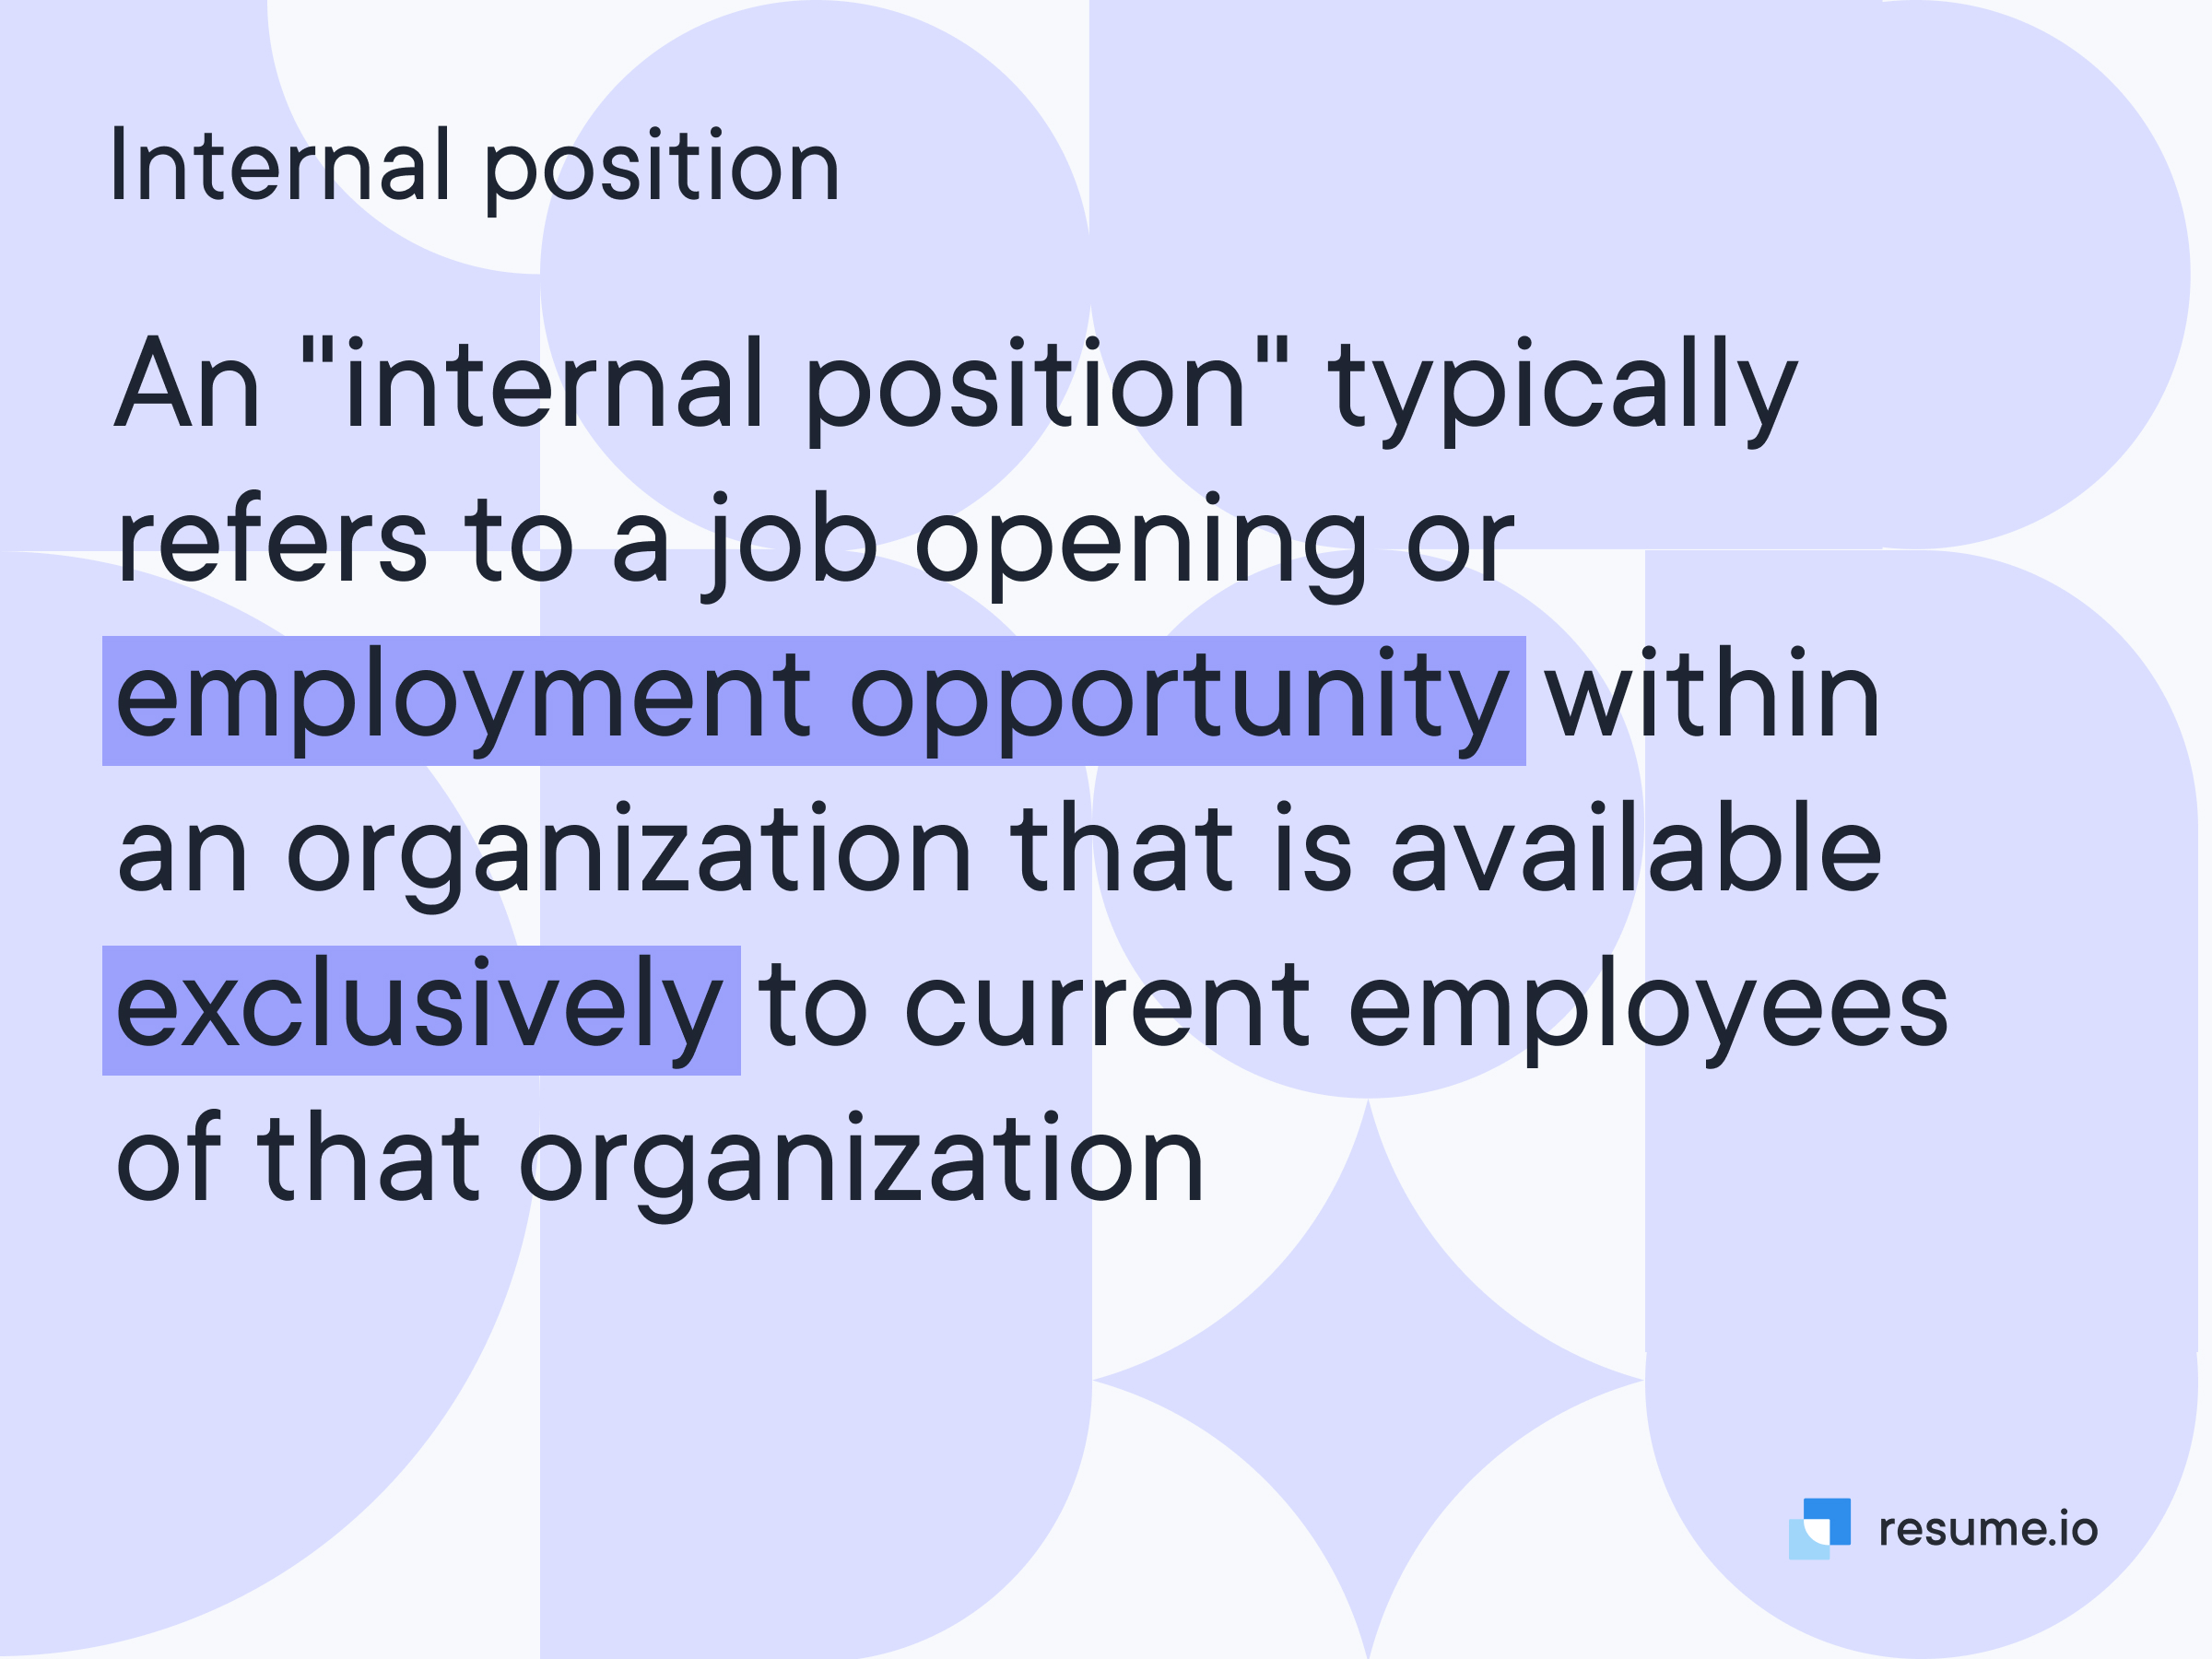 An internal position refers to a job opening within an organization exclusively available to current employees